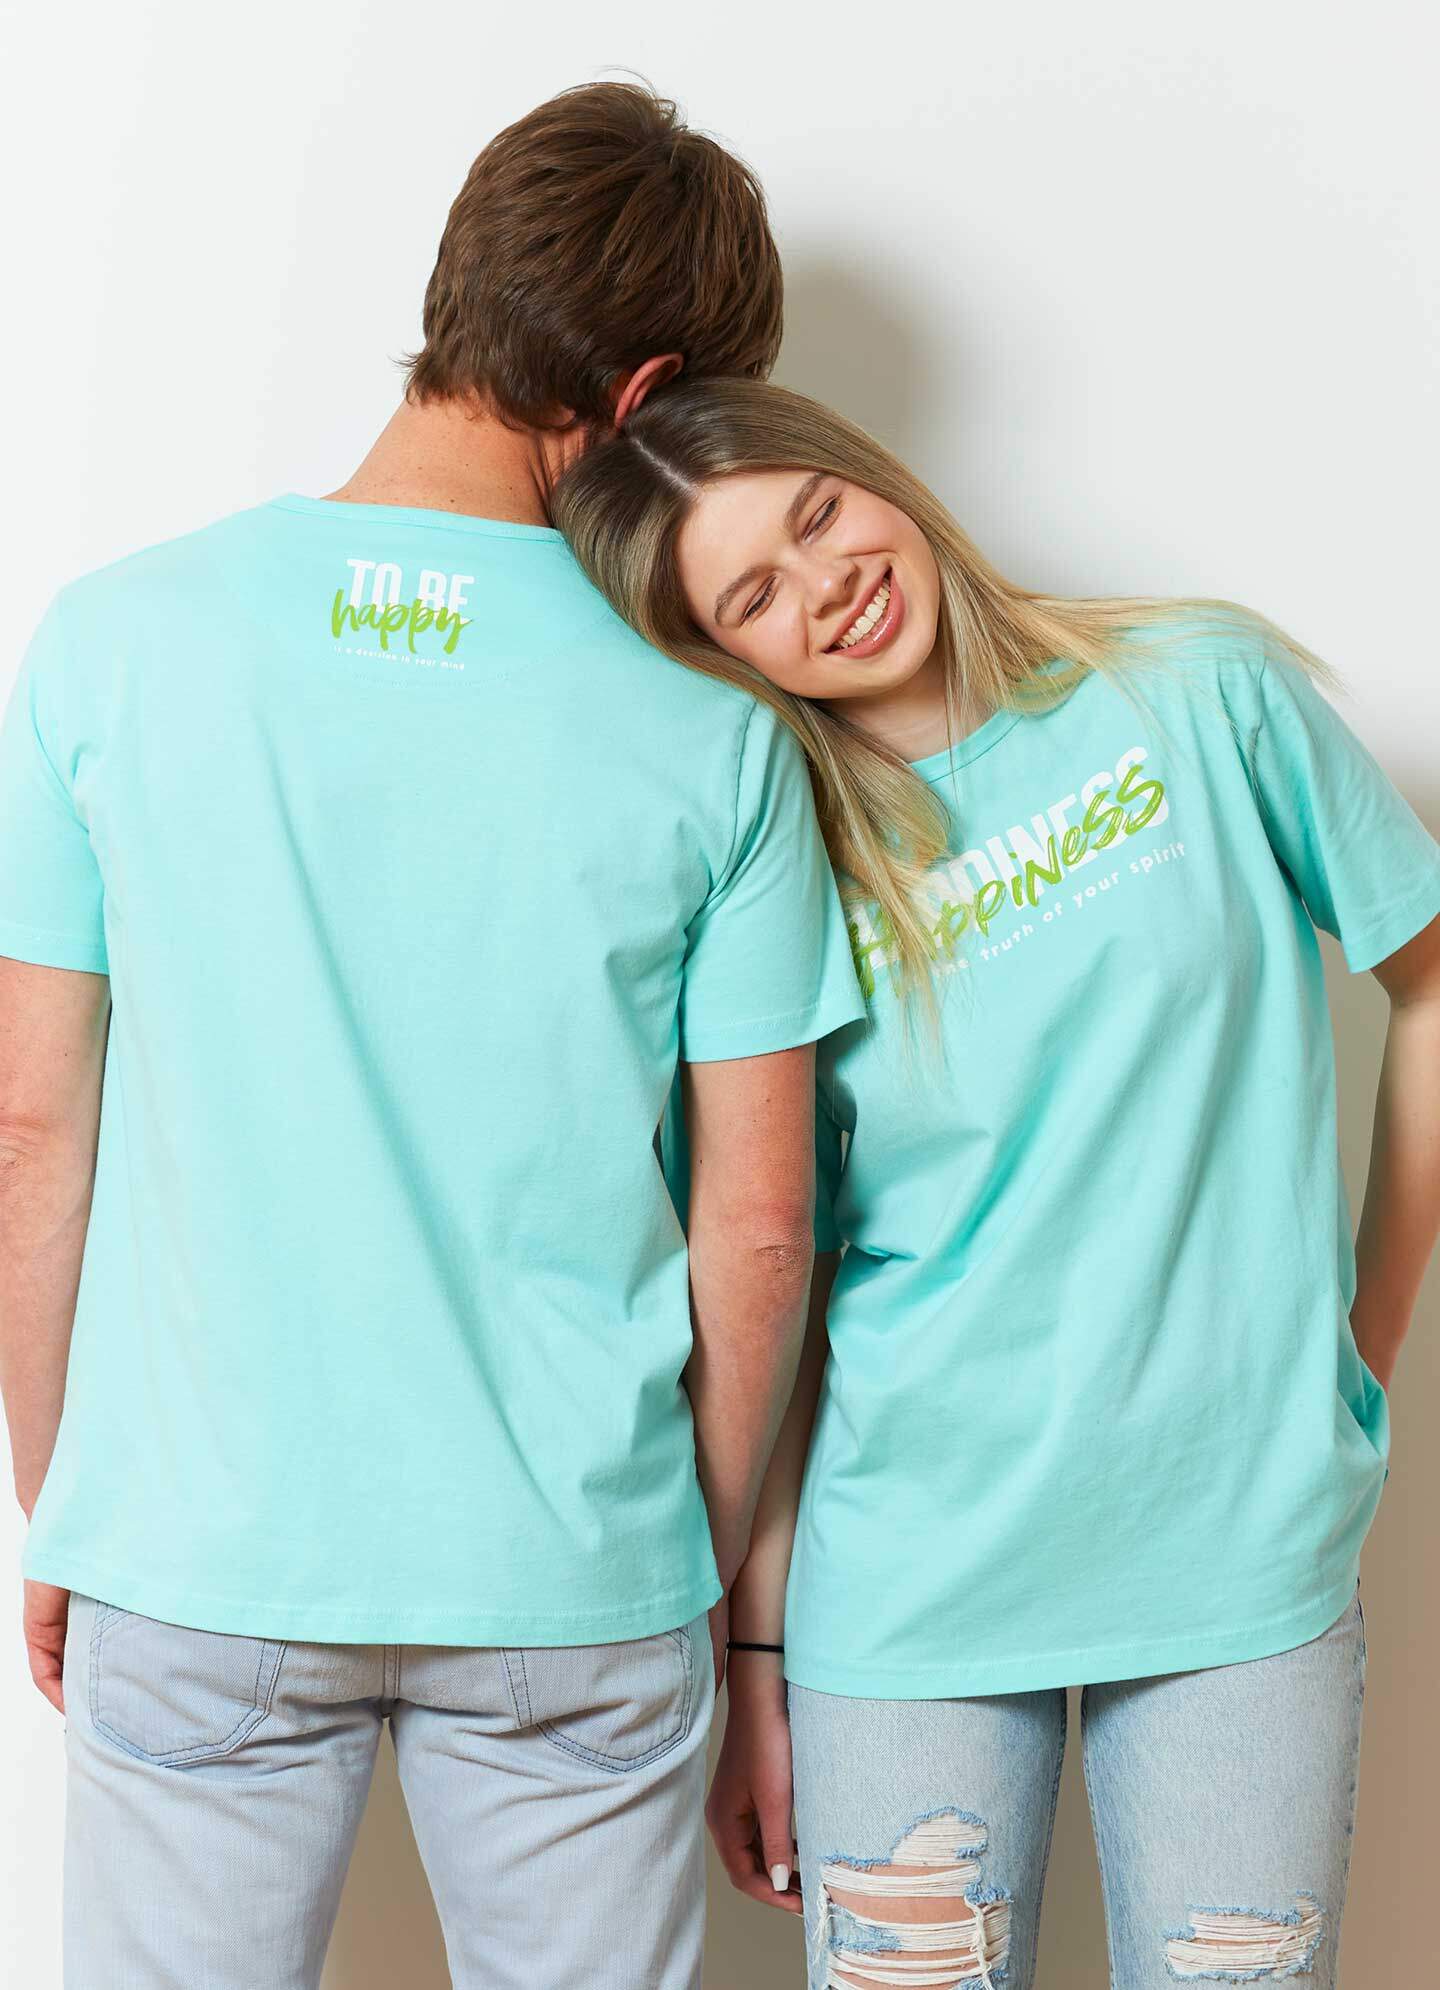 sparkles of light t shirt 105 3 turquoise double 01756 w